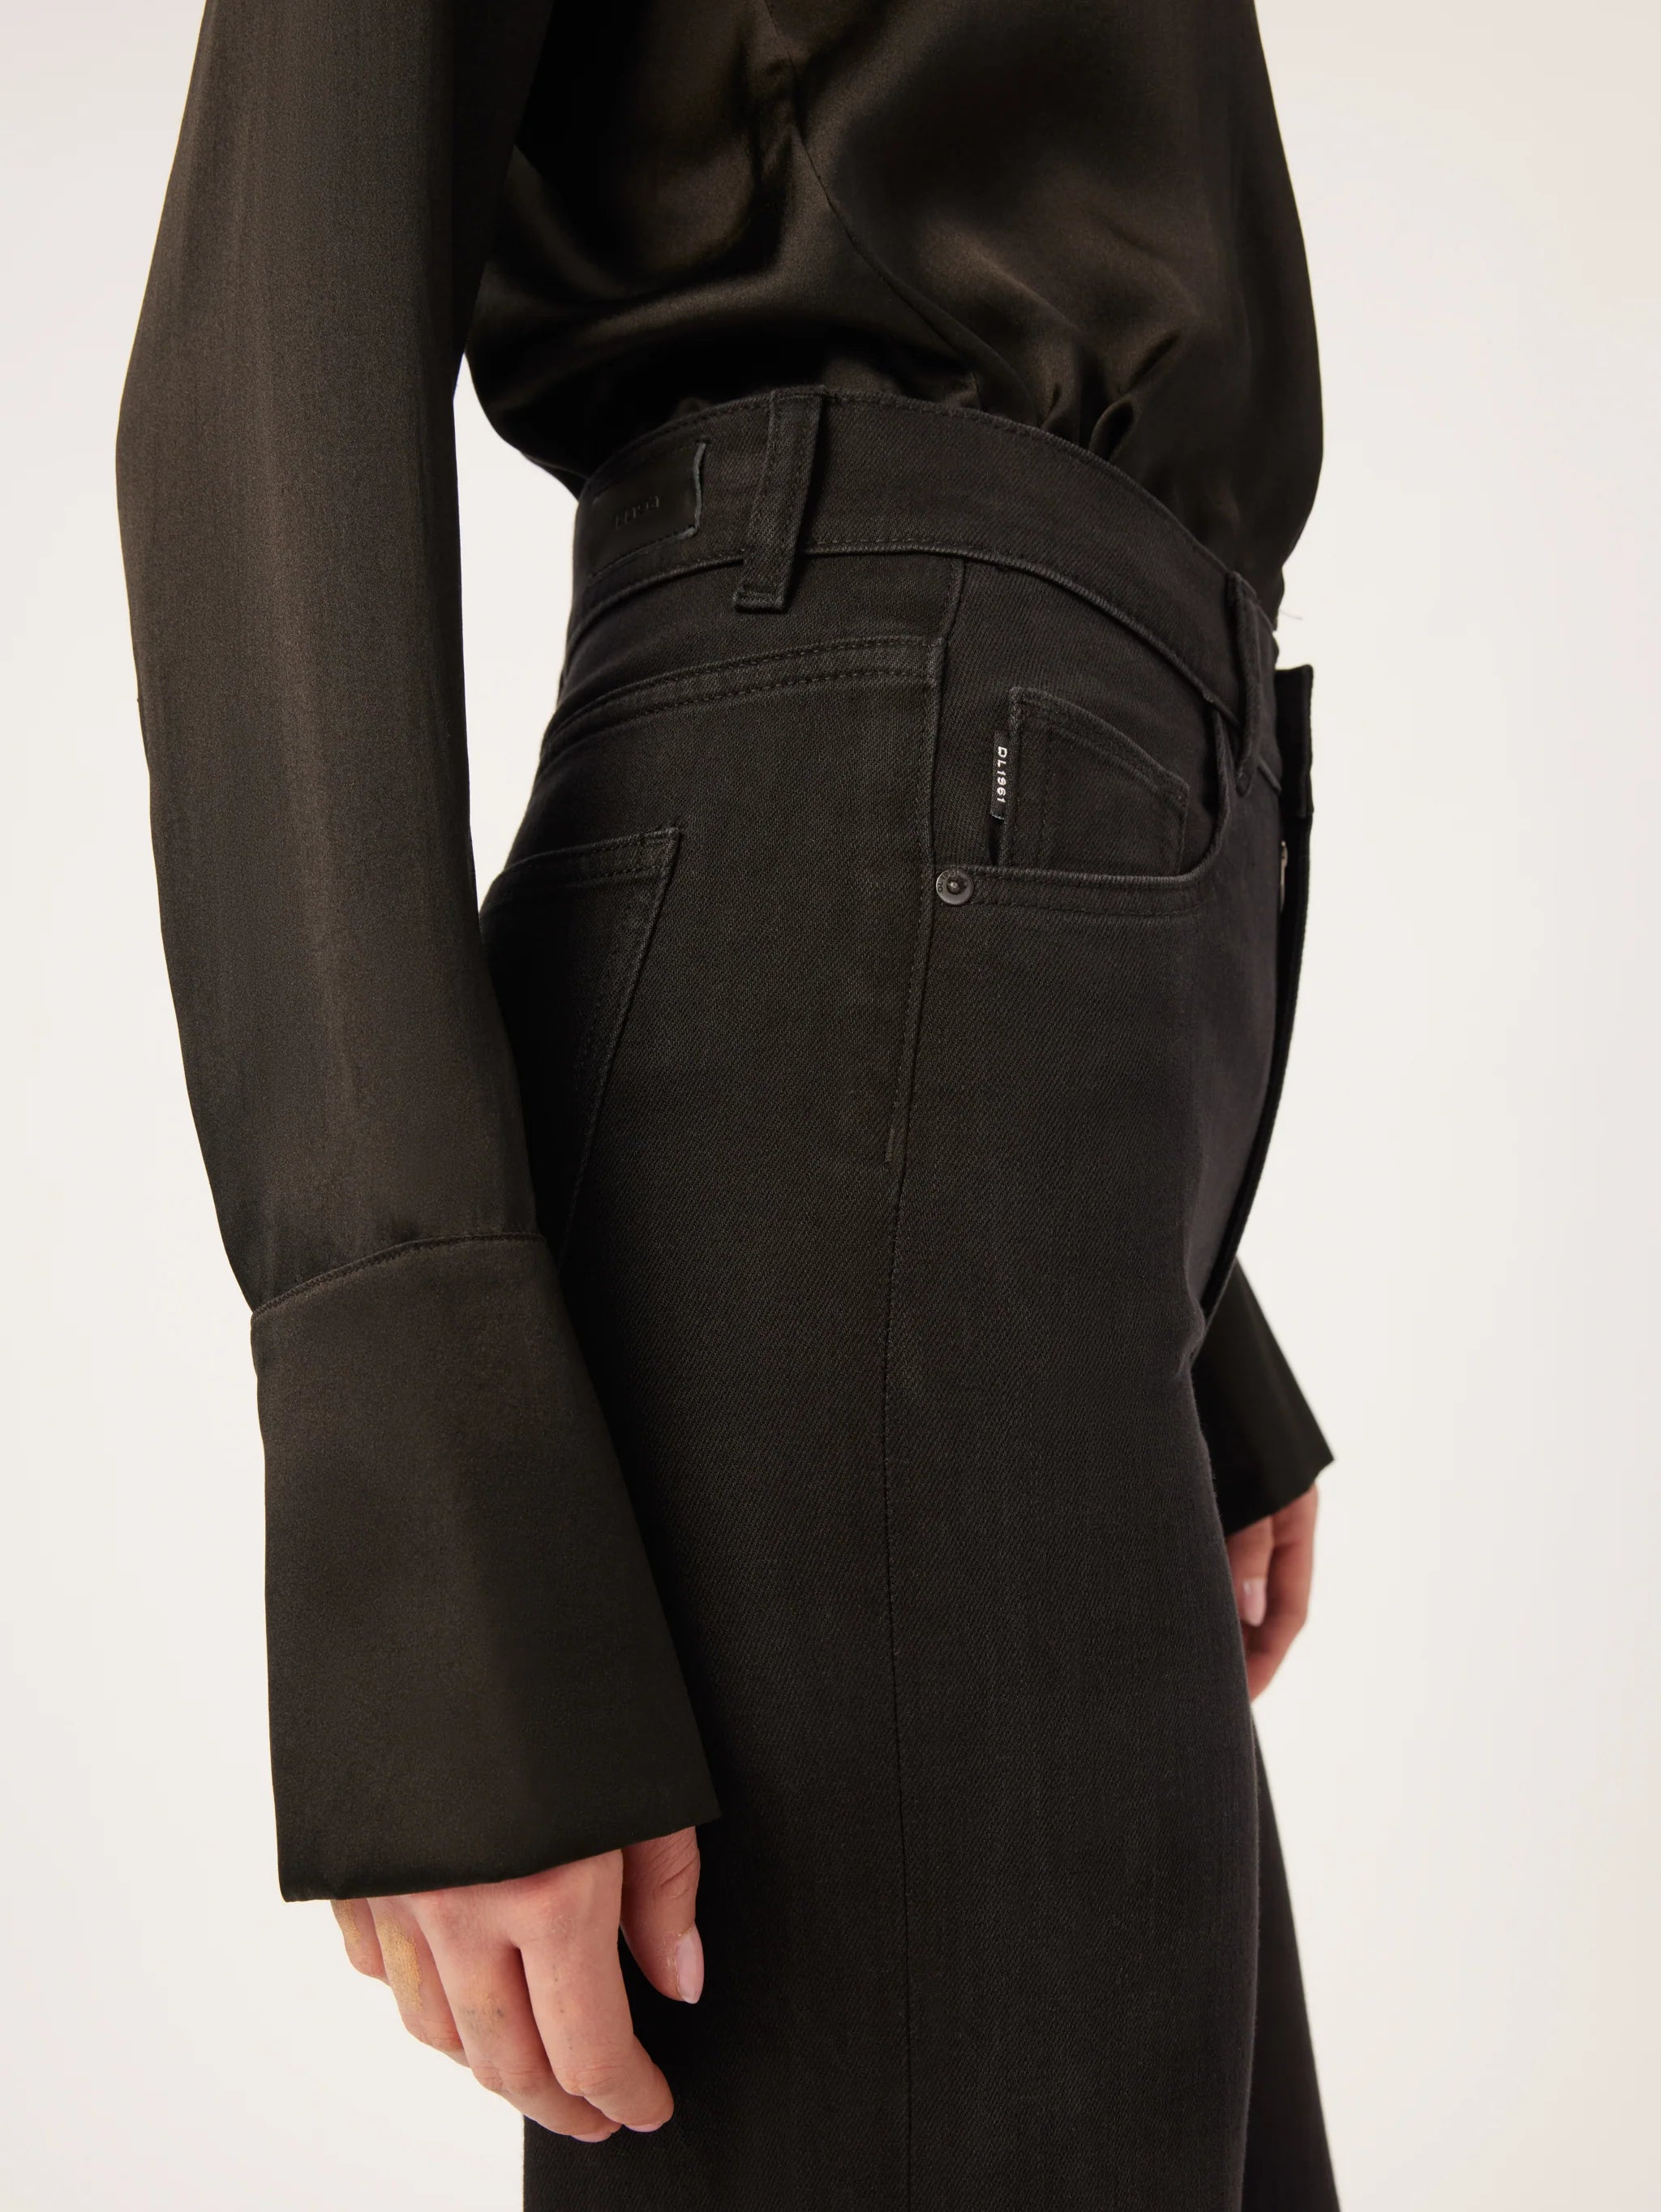 The back view of a woman wearing DL1961 Hepburn Wide Leg - Jet Black vintage high-rise jeans.